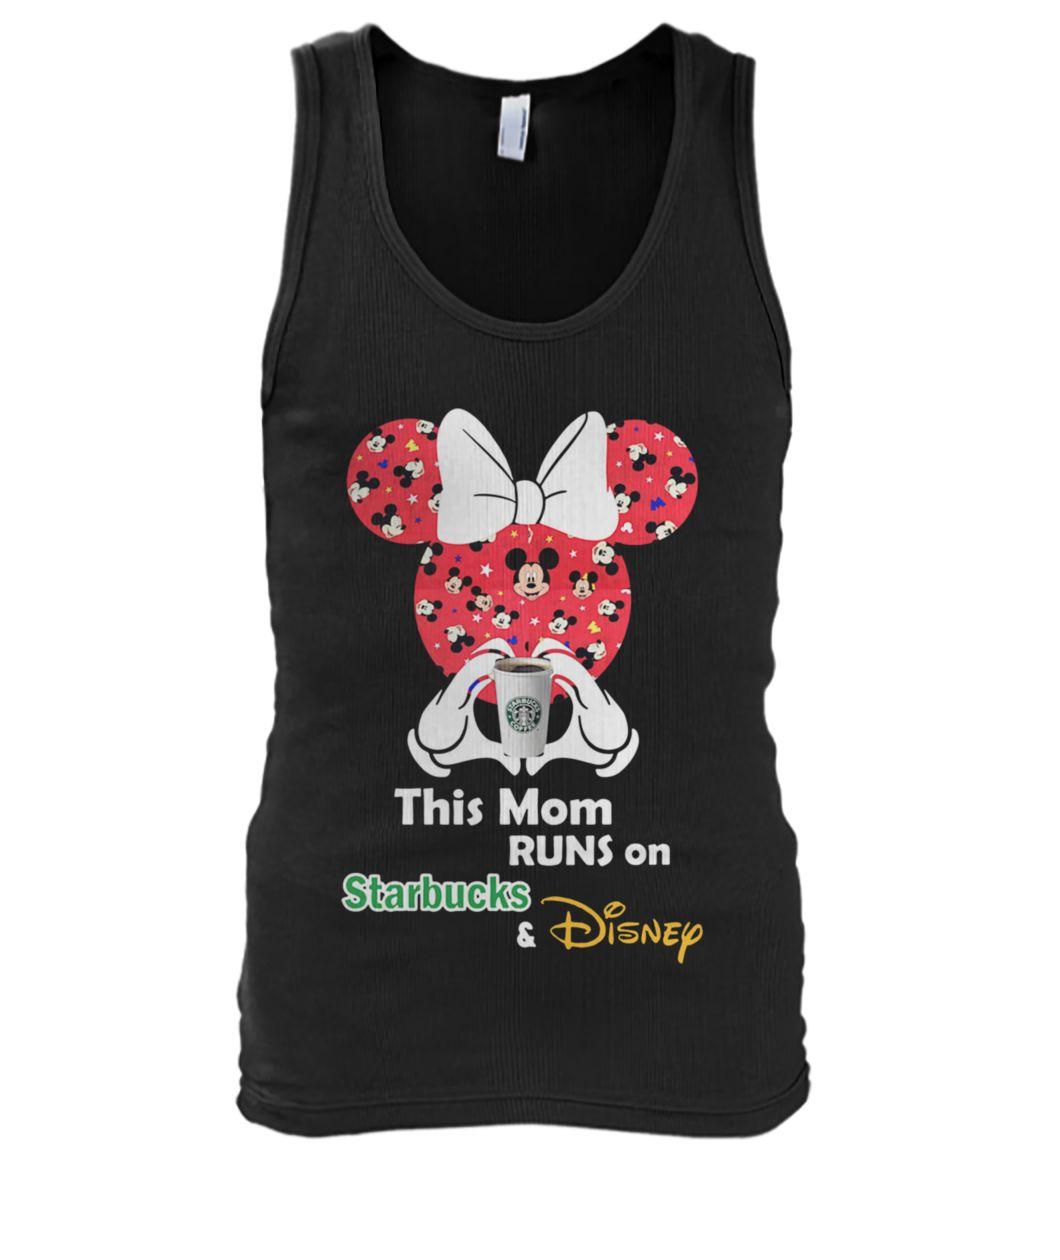 Mickey and minnie mouse this mom runs on starbucks and disney tank top